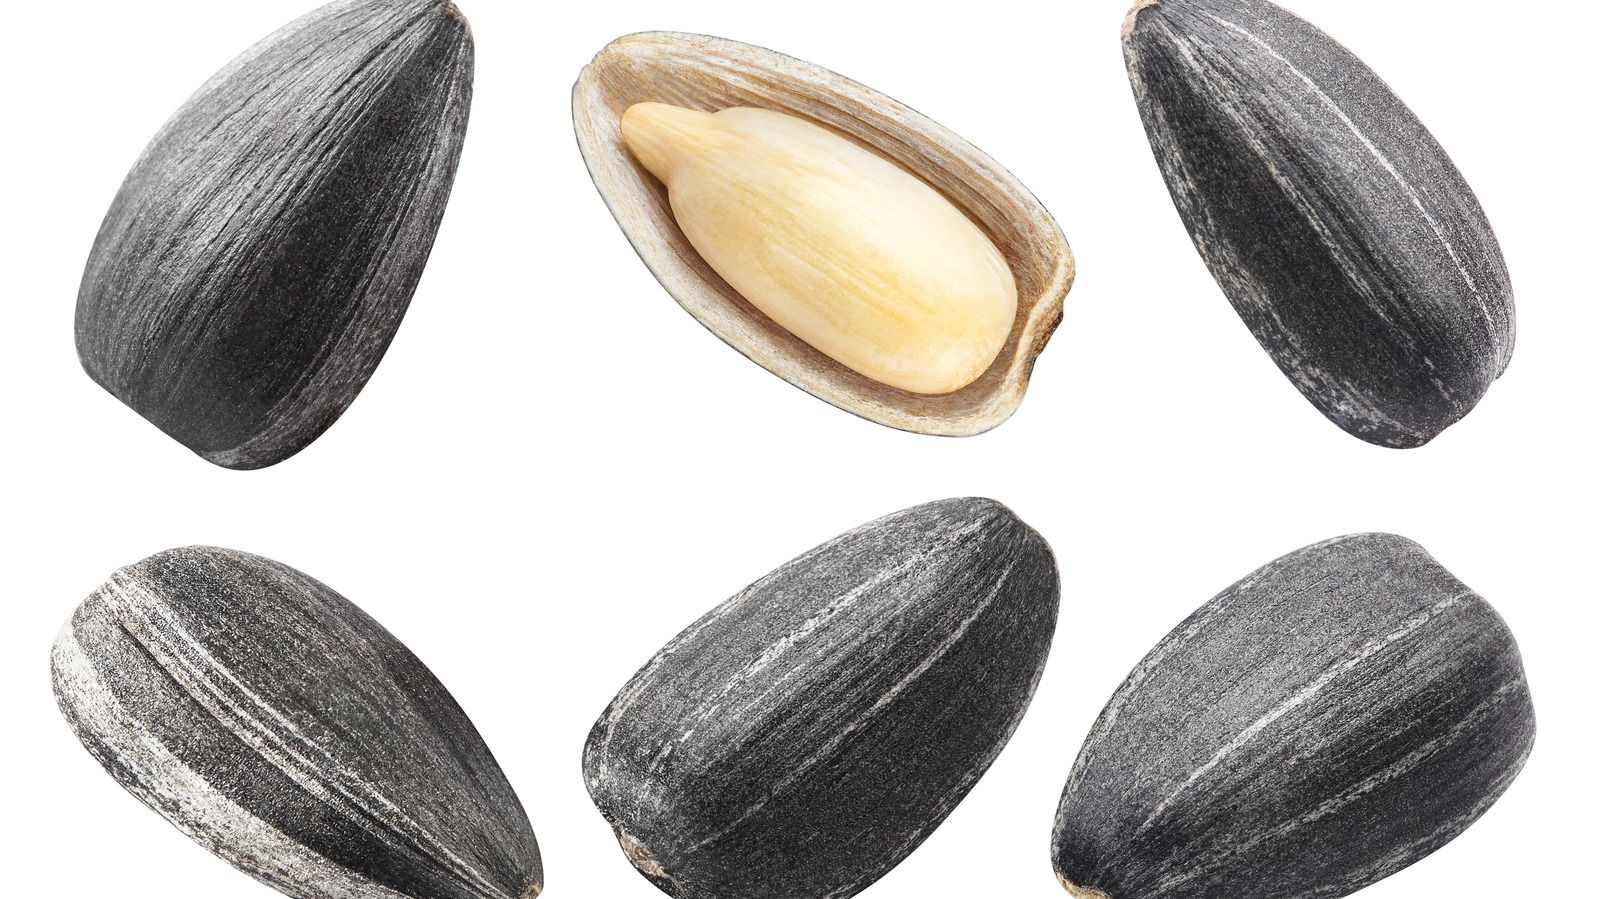 Can You Actually Eat Sunflower Seed Shells?